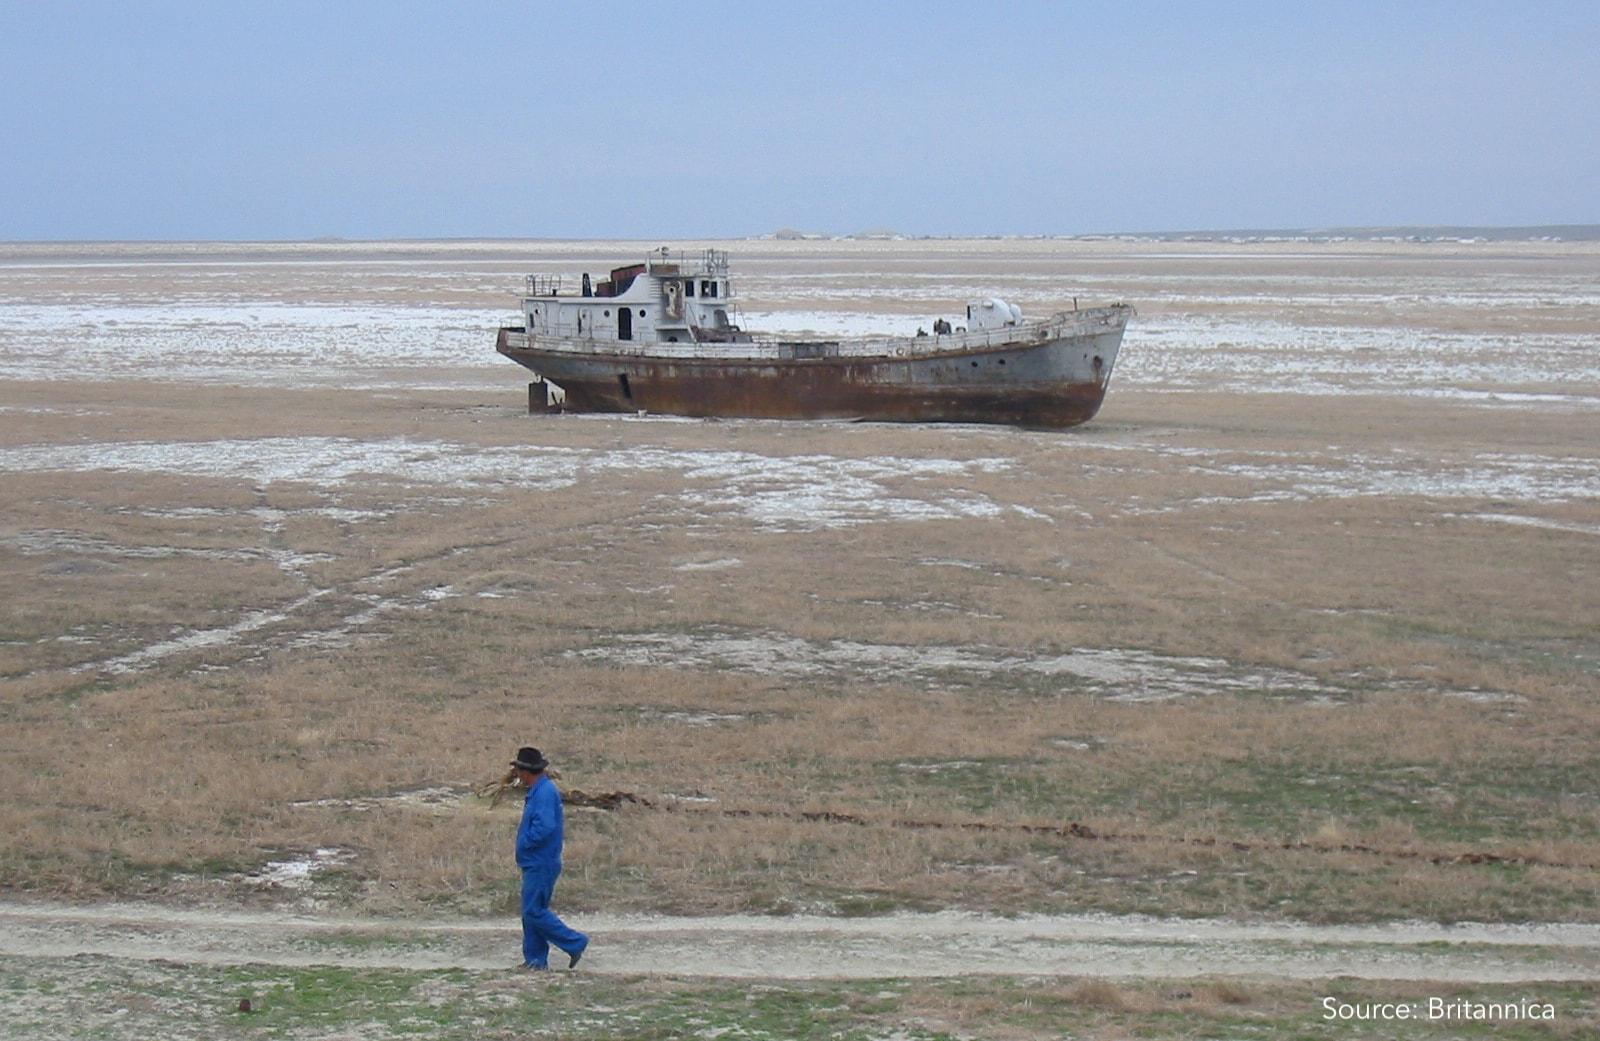 The Cautionary Tale of the Aral Sea: Environmental Destruction at Economic Costs